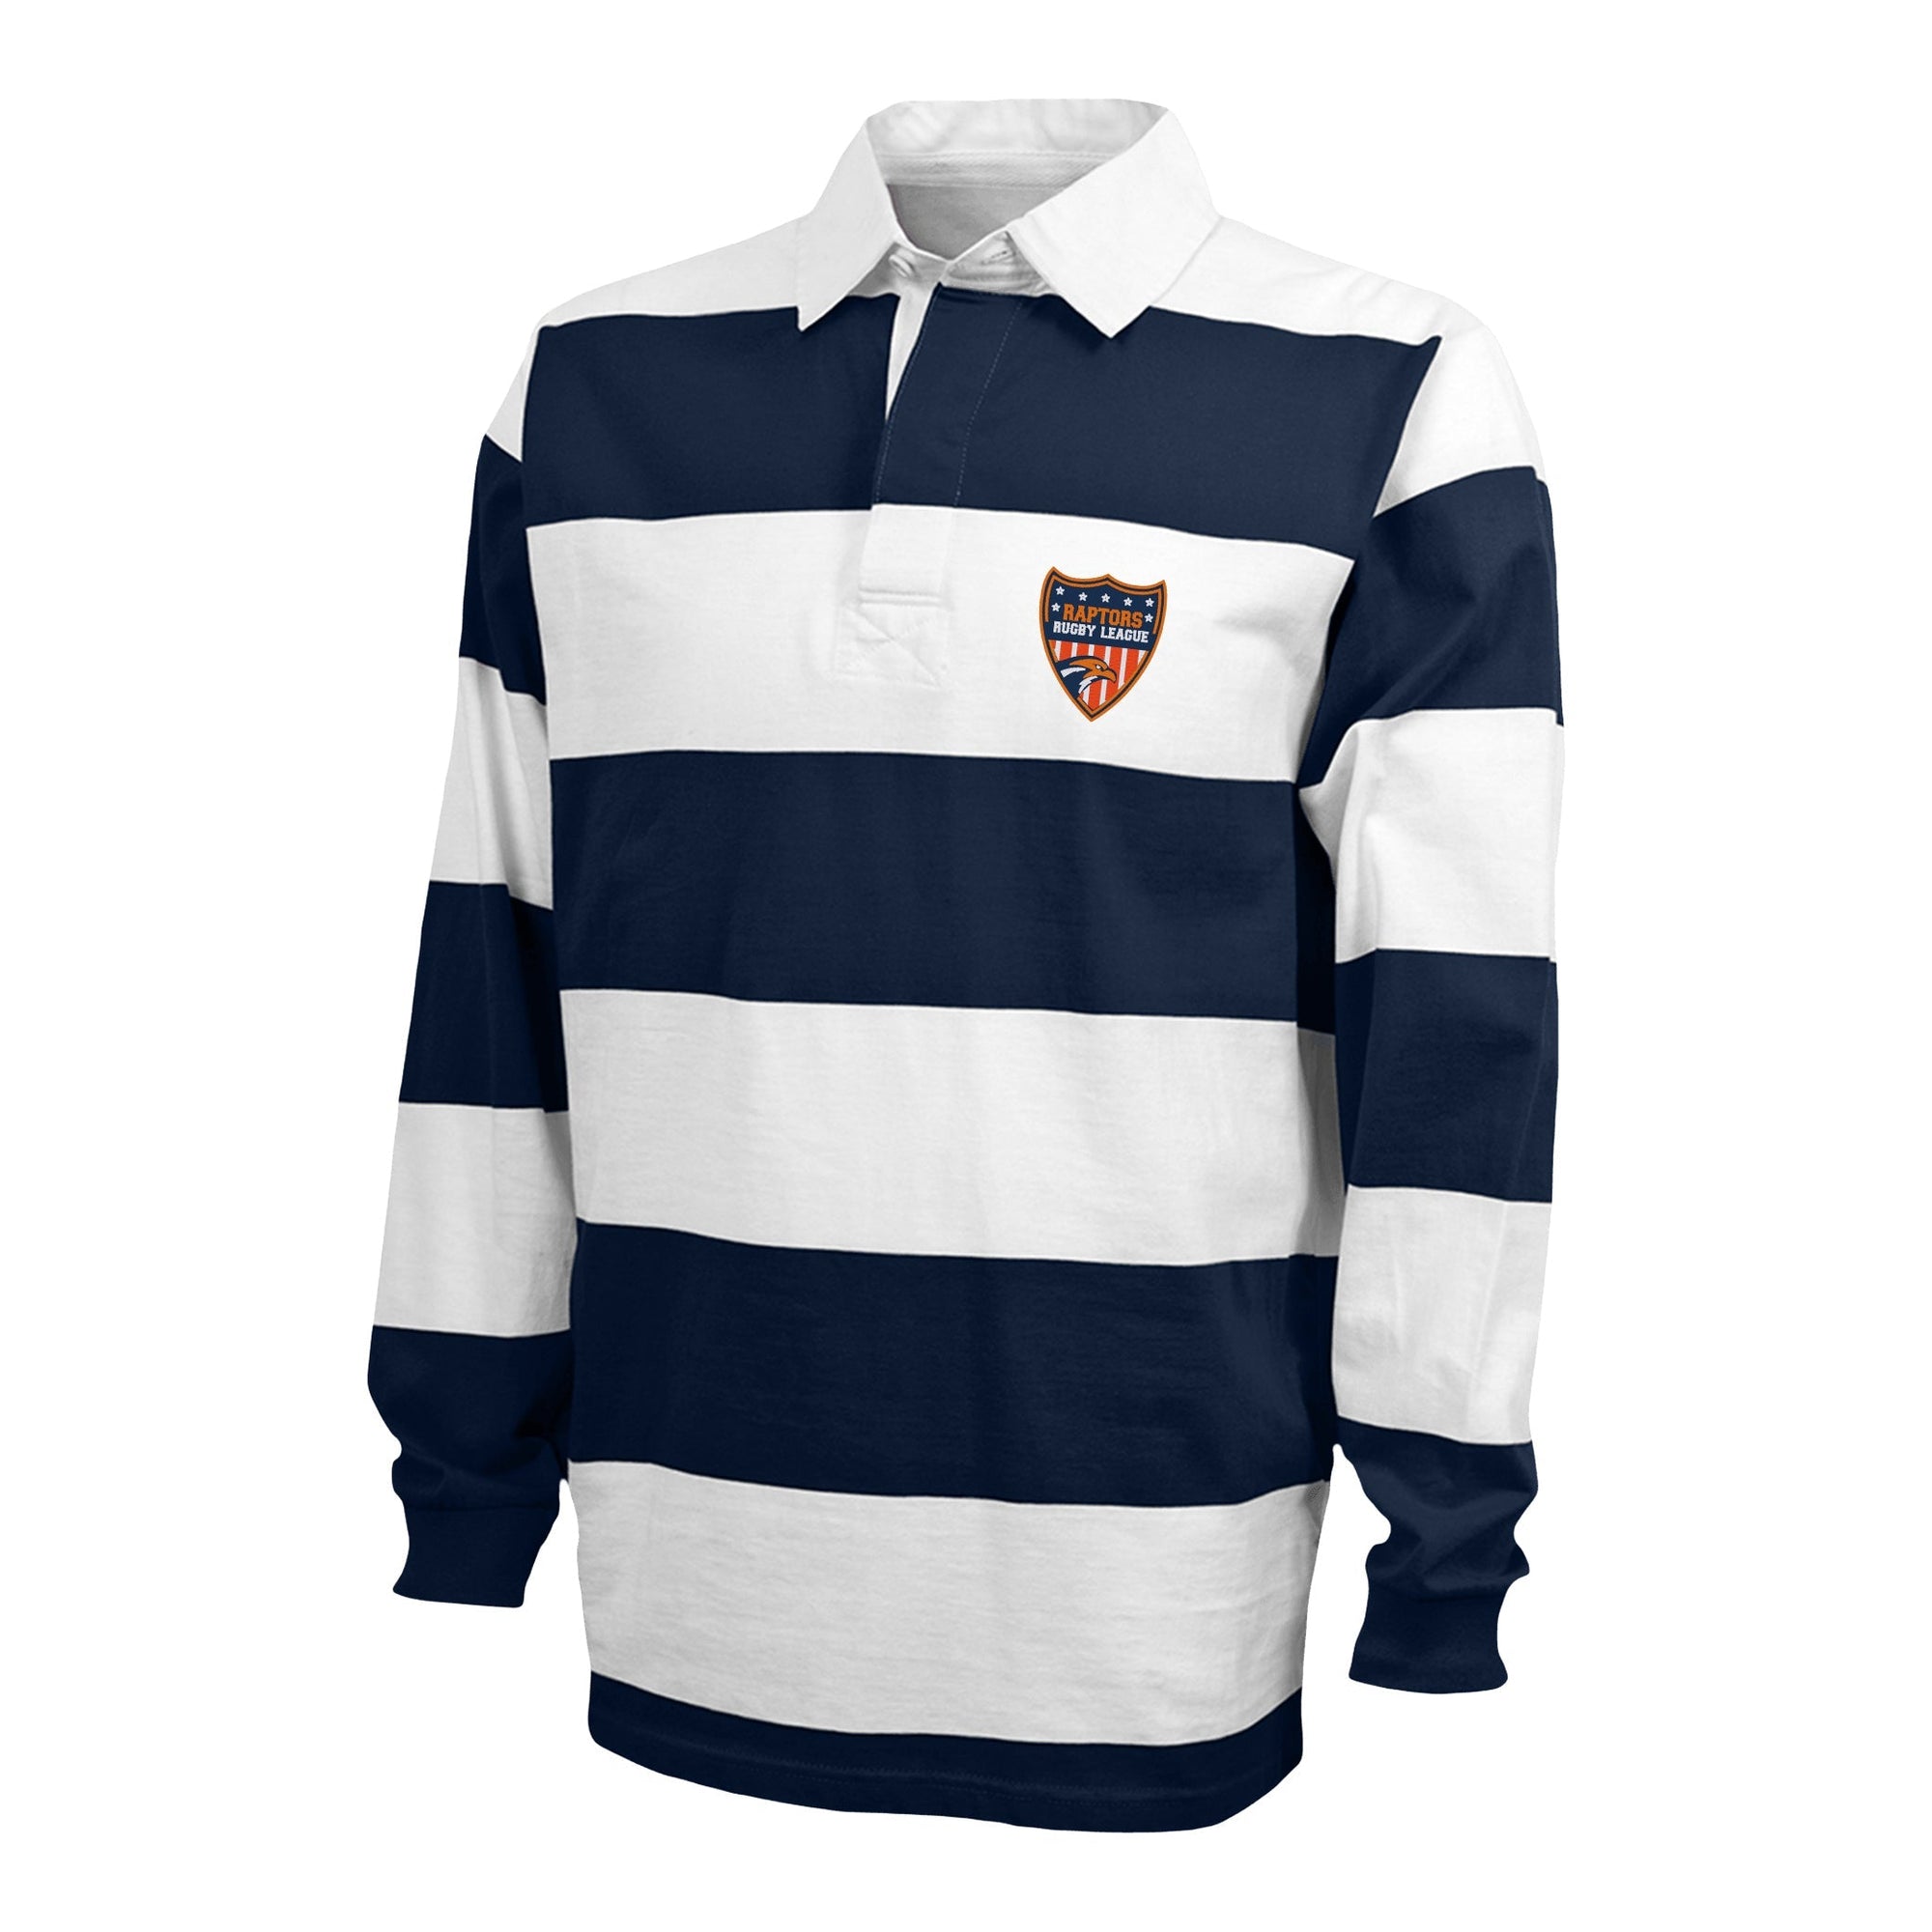 Rugby Imports Raptors RL Cotton Social Jersey